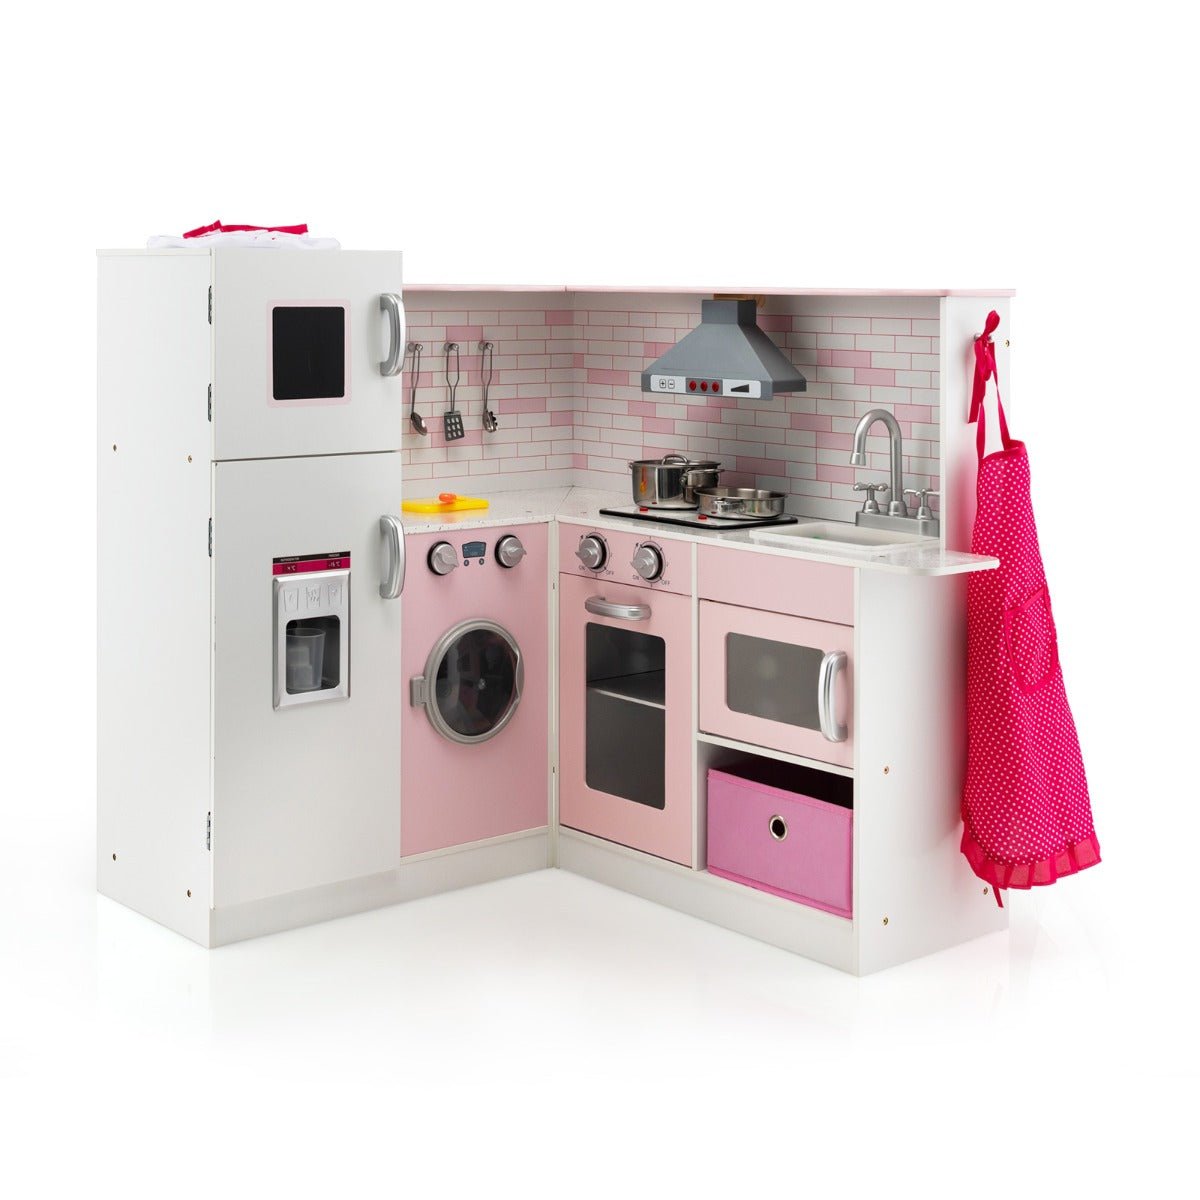 Empowering Young Chefs: Kids Kitchen Pretend Play Set with Cookware & Apron